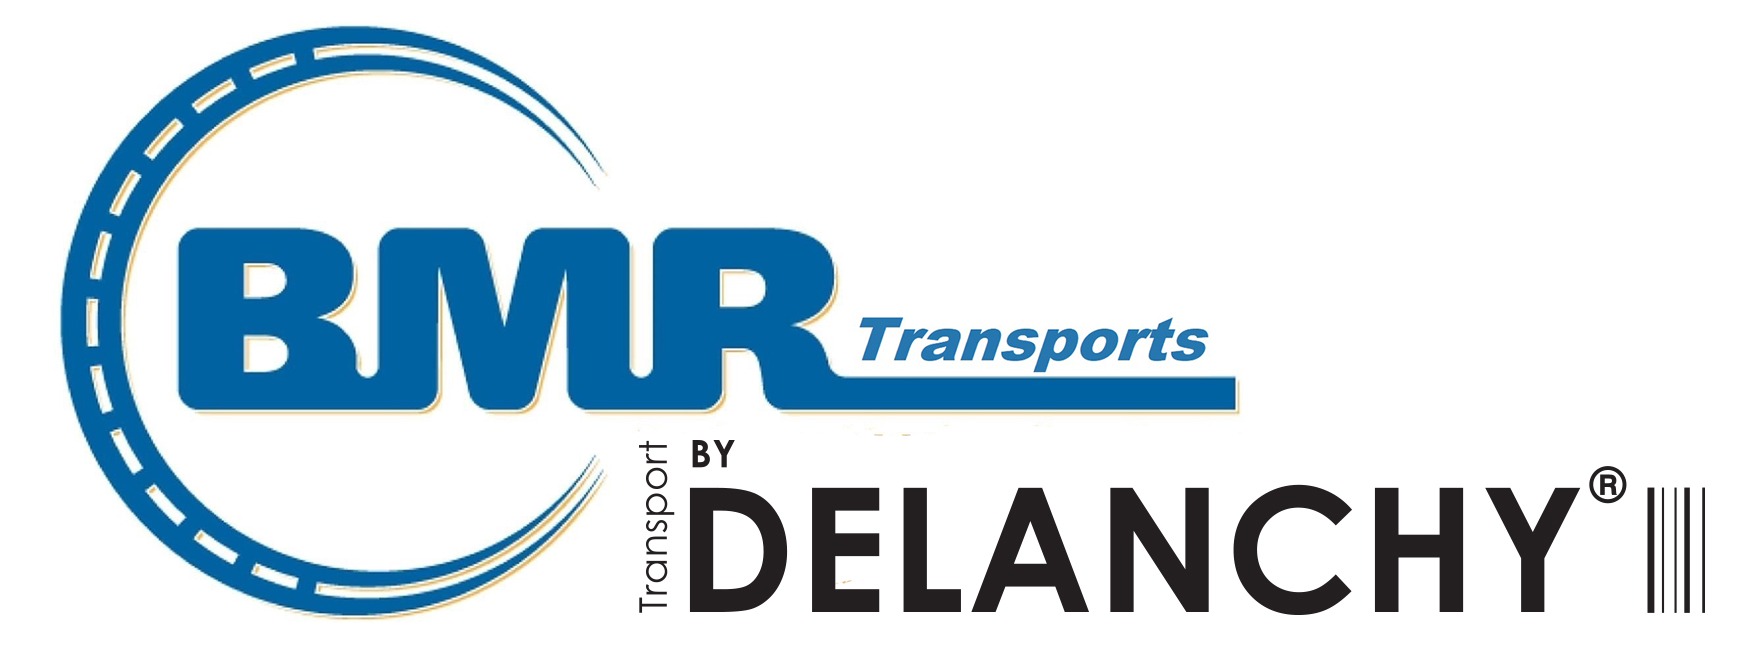 <strong>BMR Transports rejoint le Groupe DELANCHY</strong>